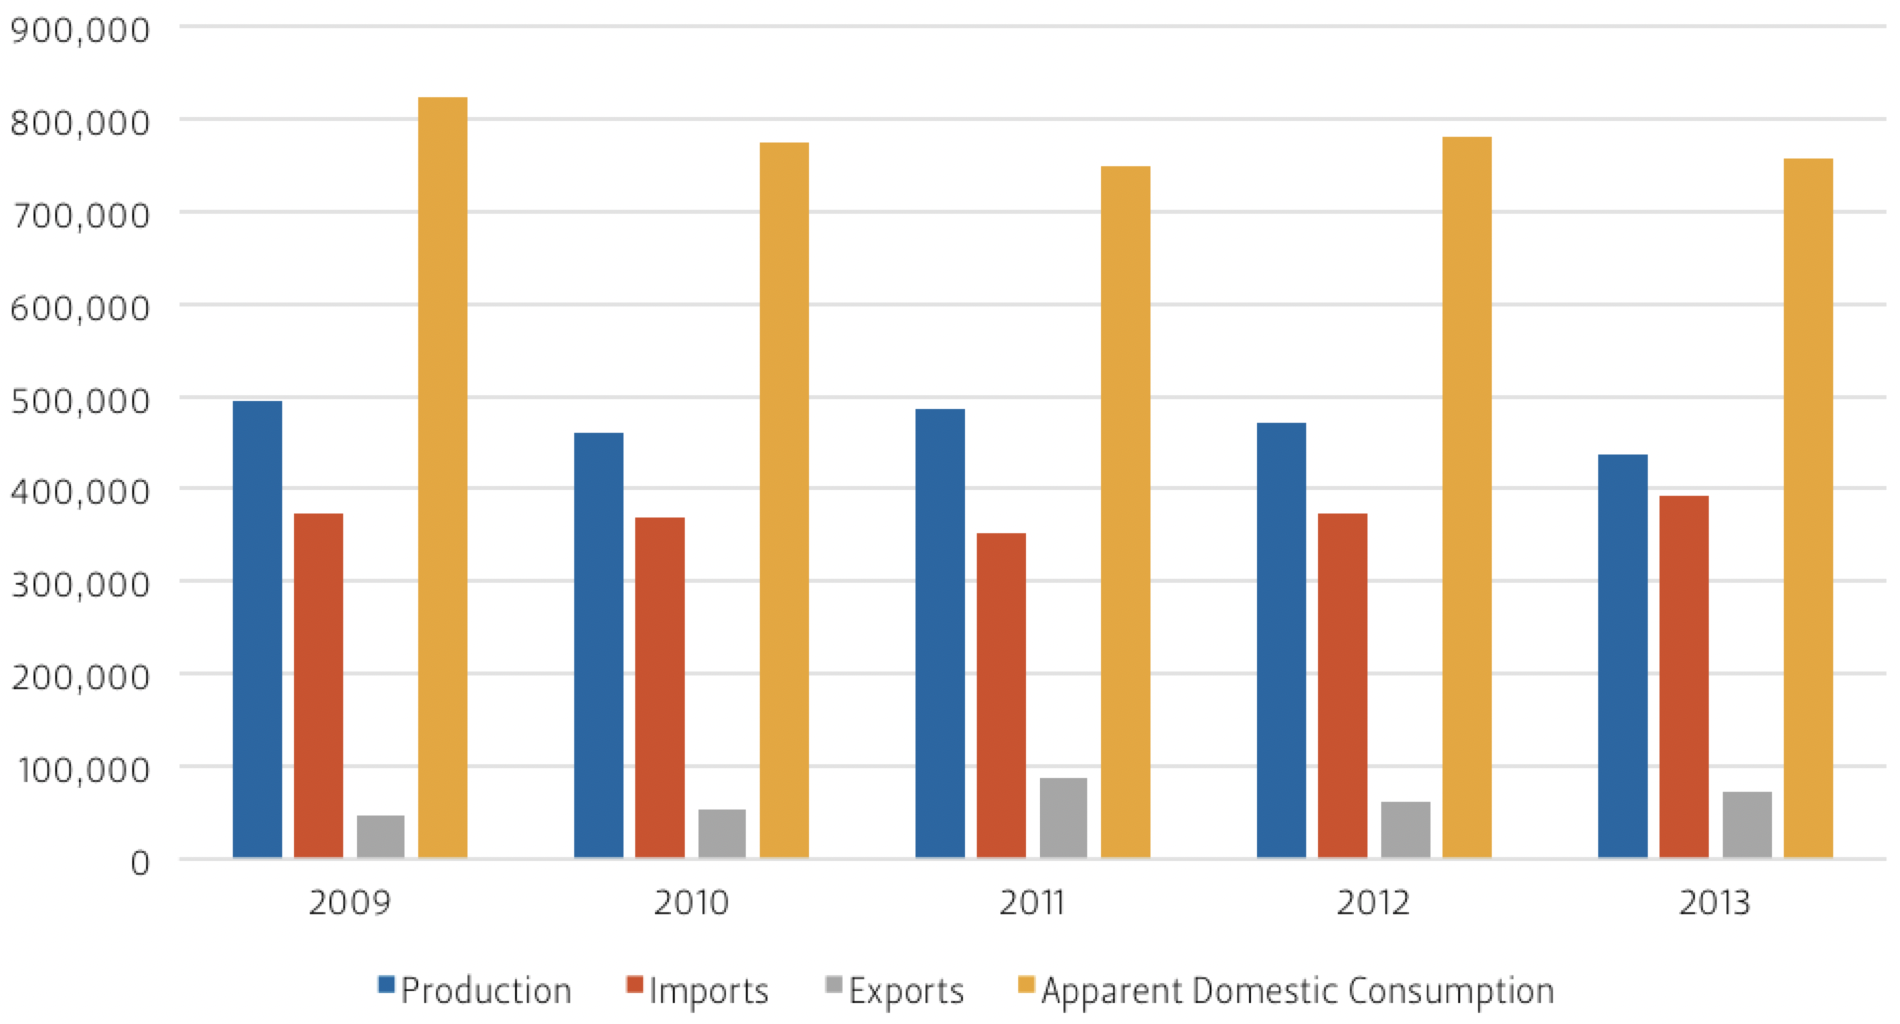 This graph compares Mexico's low-density polyethylene trade, production, and consumption over time.